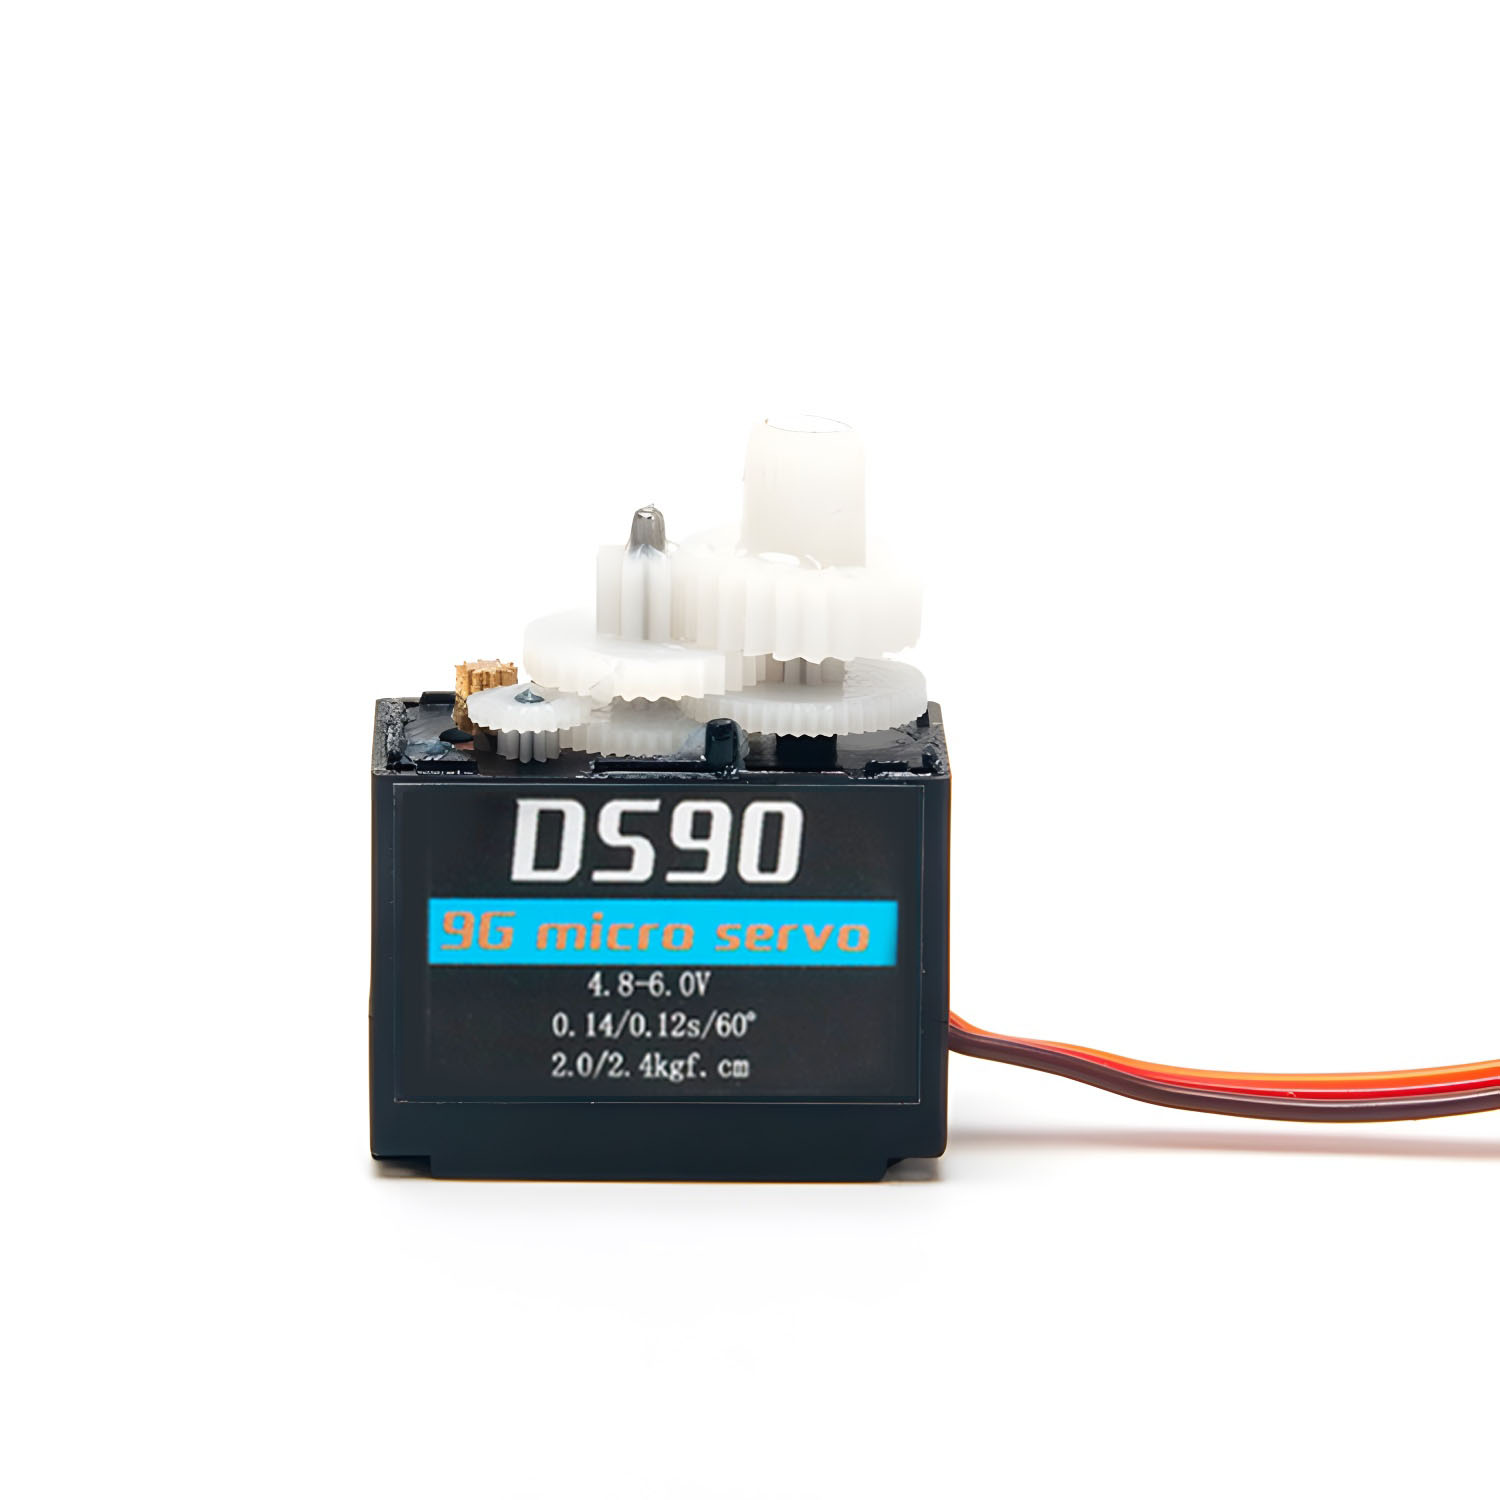 Bcato DS90 9g Plastic Gear 2.4KG High Torque Micro Digital Servo For RC Car Airplane Helicopter Robot